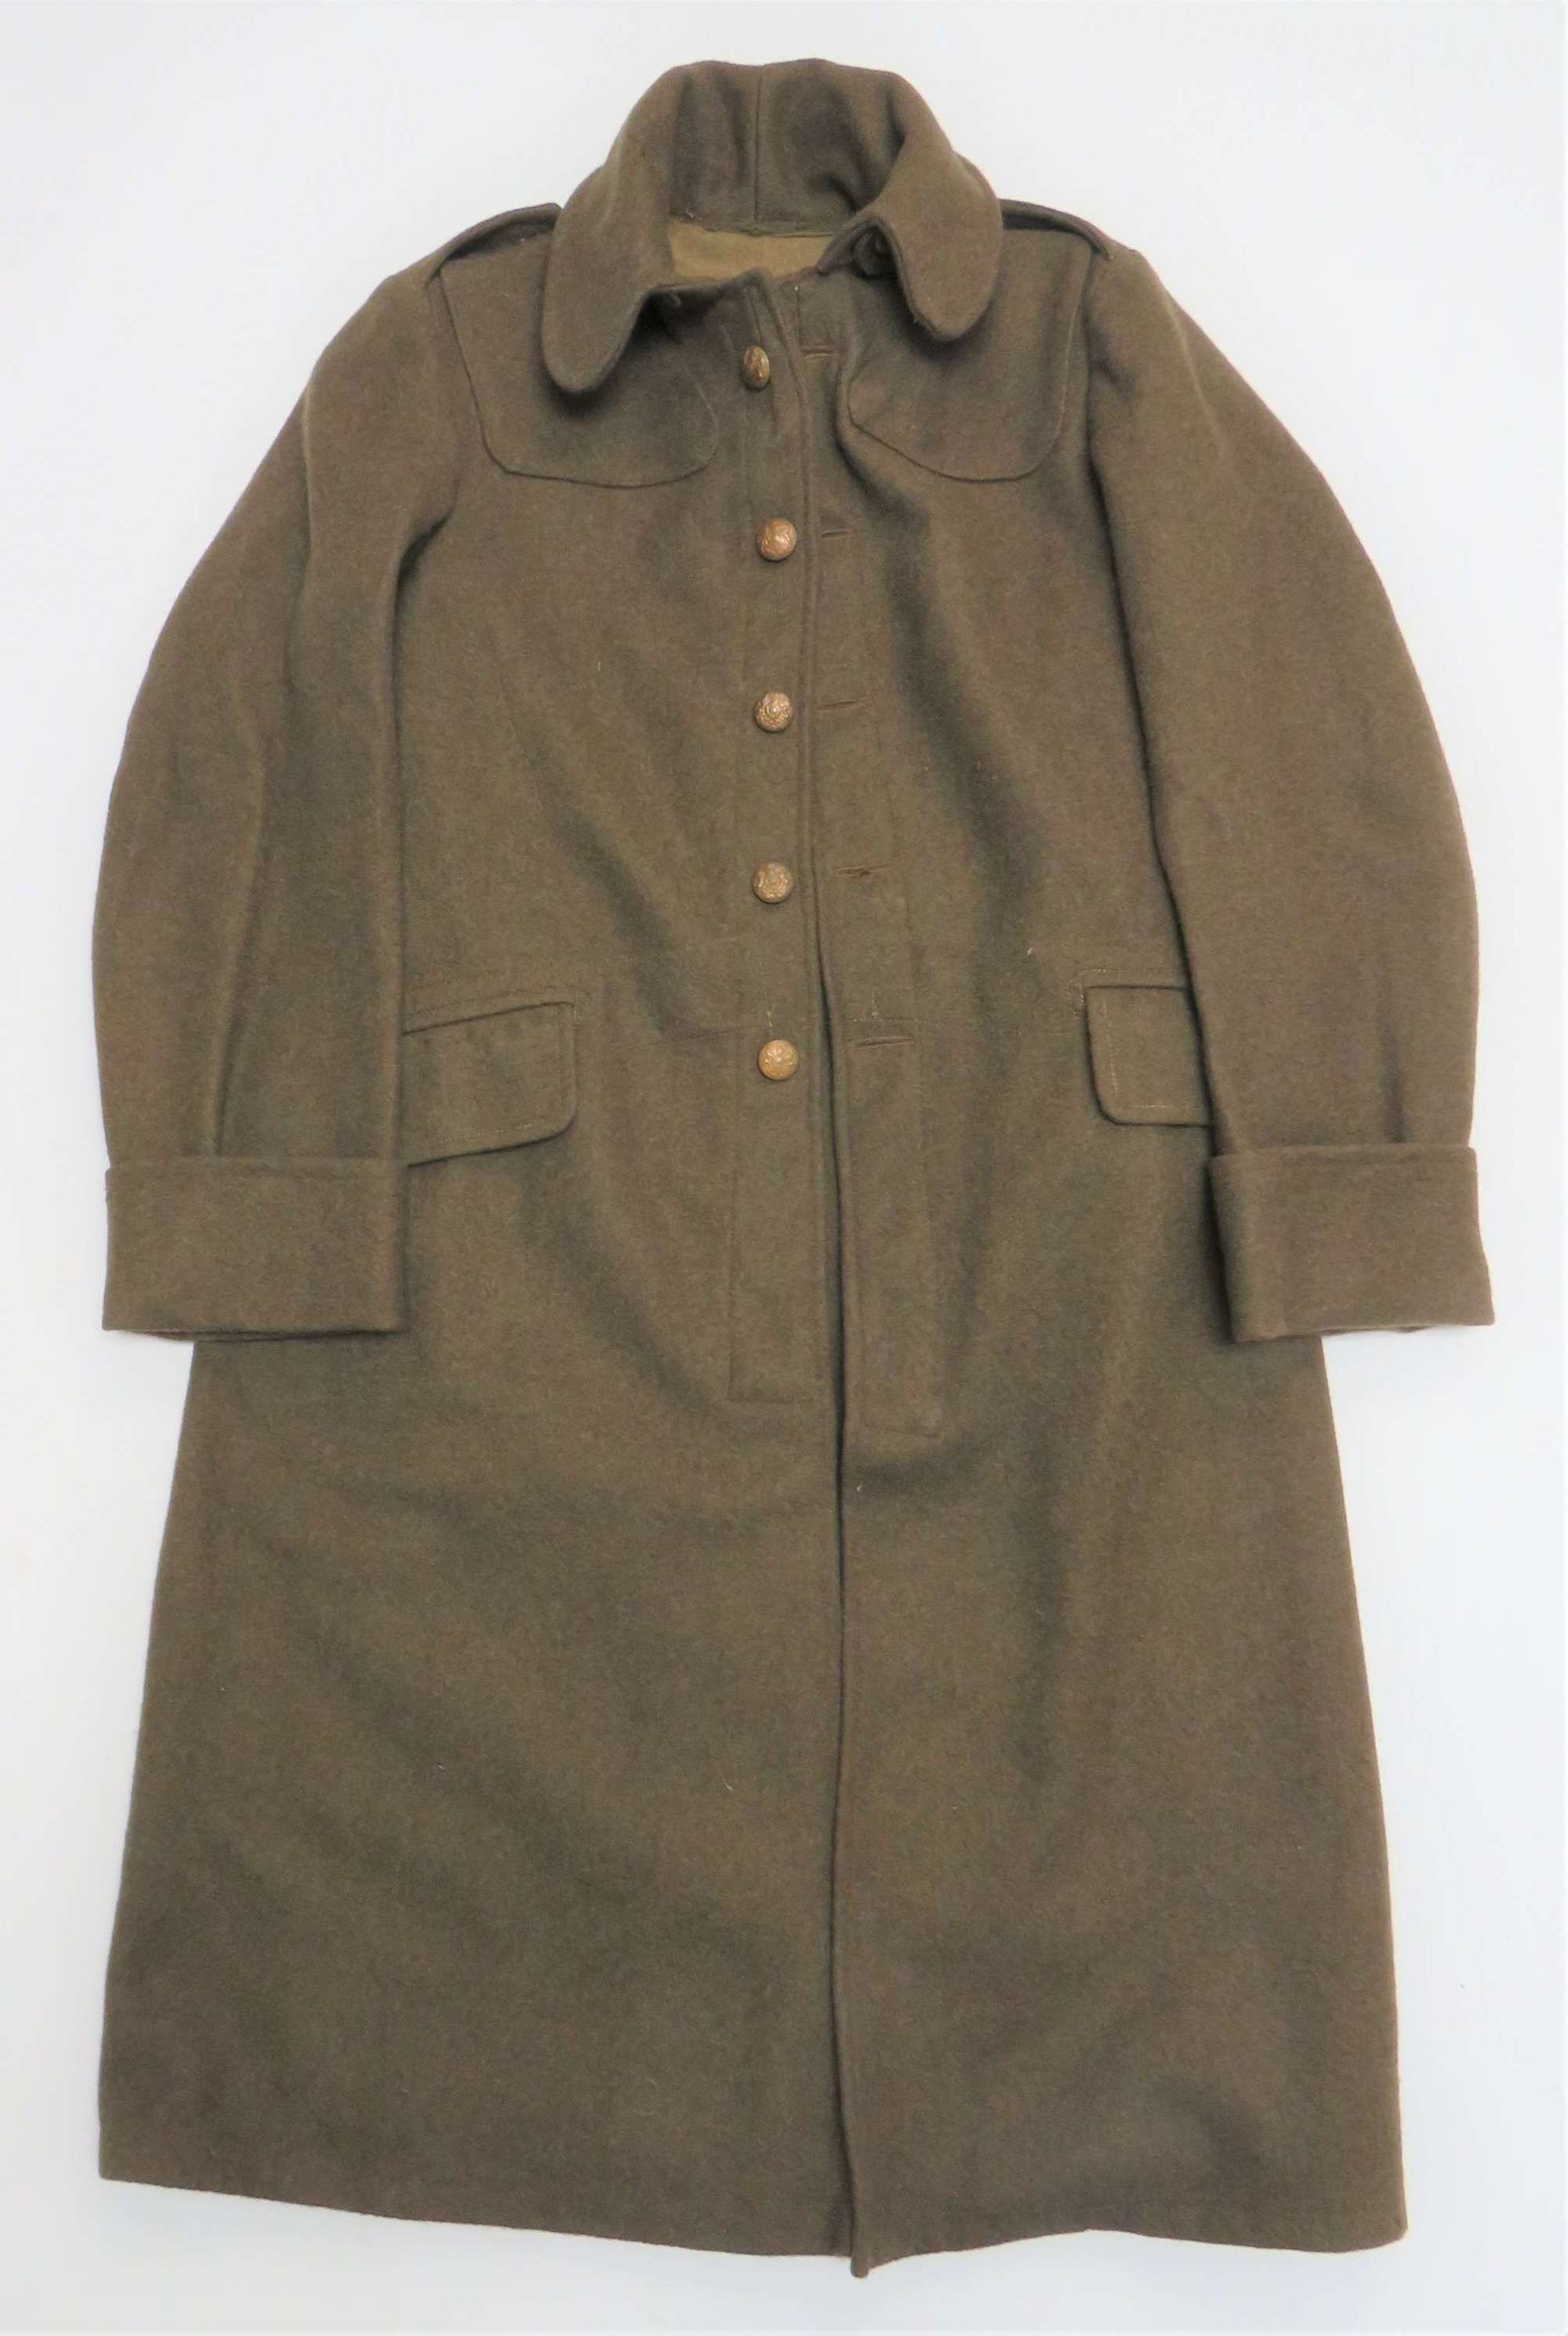 Scarce 1922 Pattern Other Ranks Greatcoat